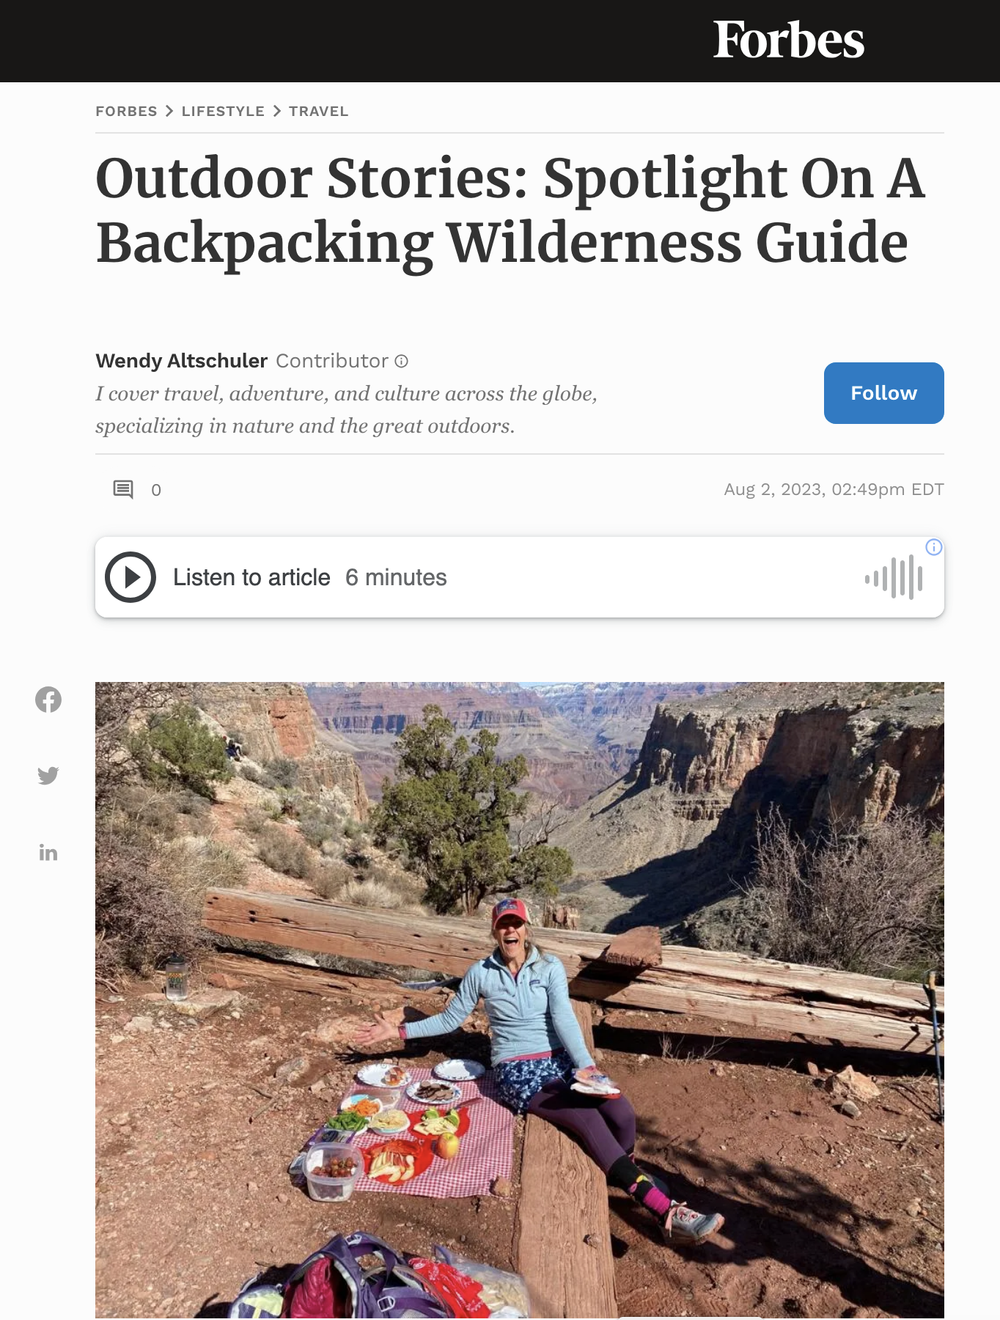 Outdoor Stories: Spotlight On A Backpacking Wilderness Guide